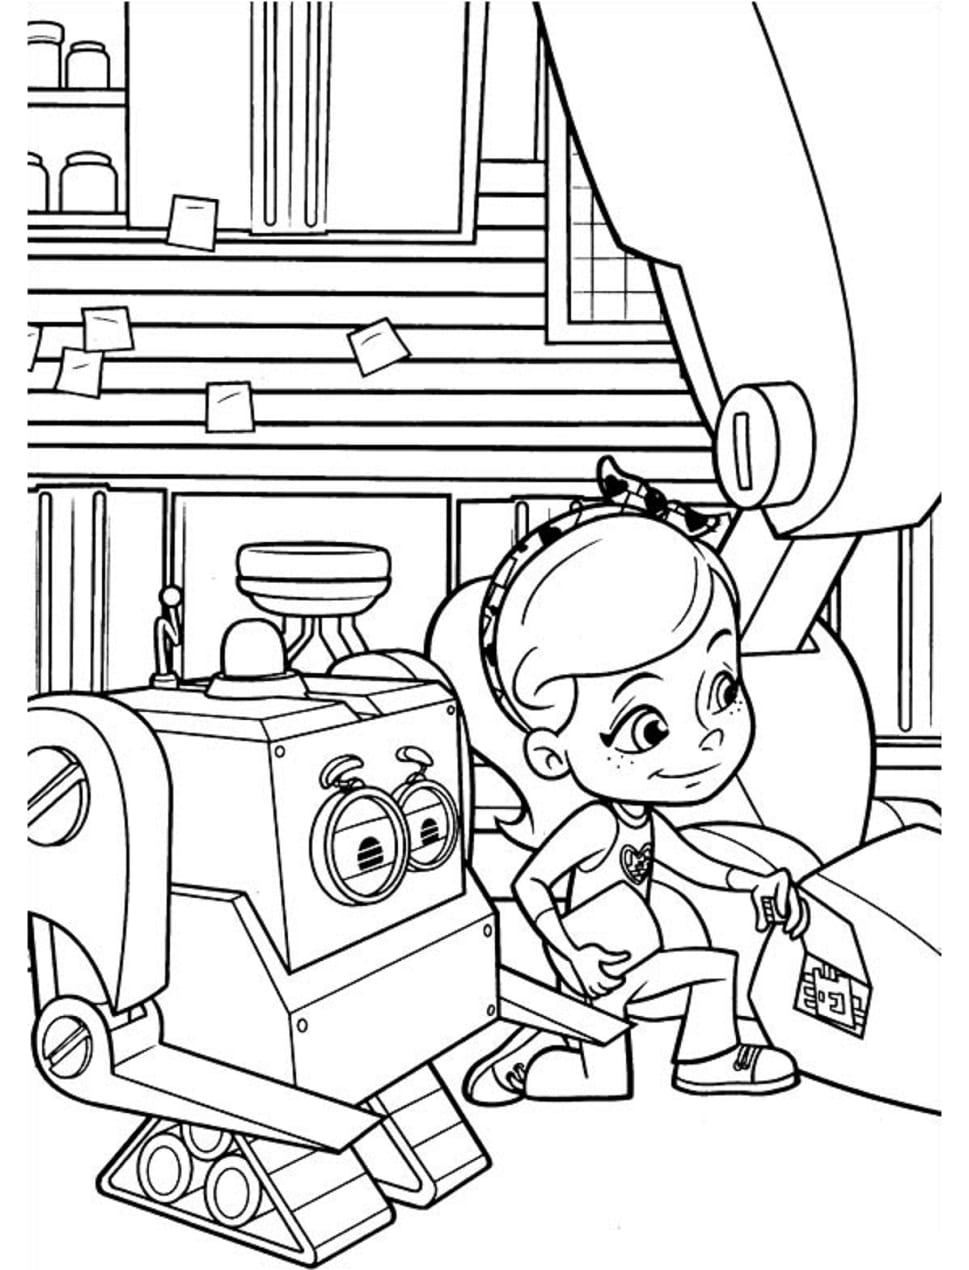 Rusty Rivets Jack et Ruby coloring page